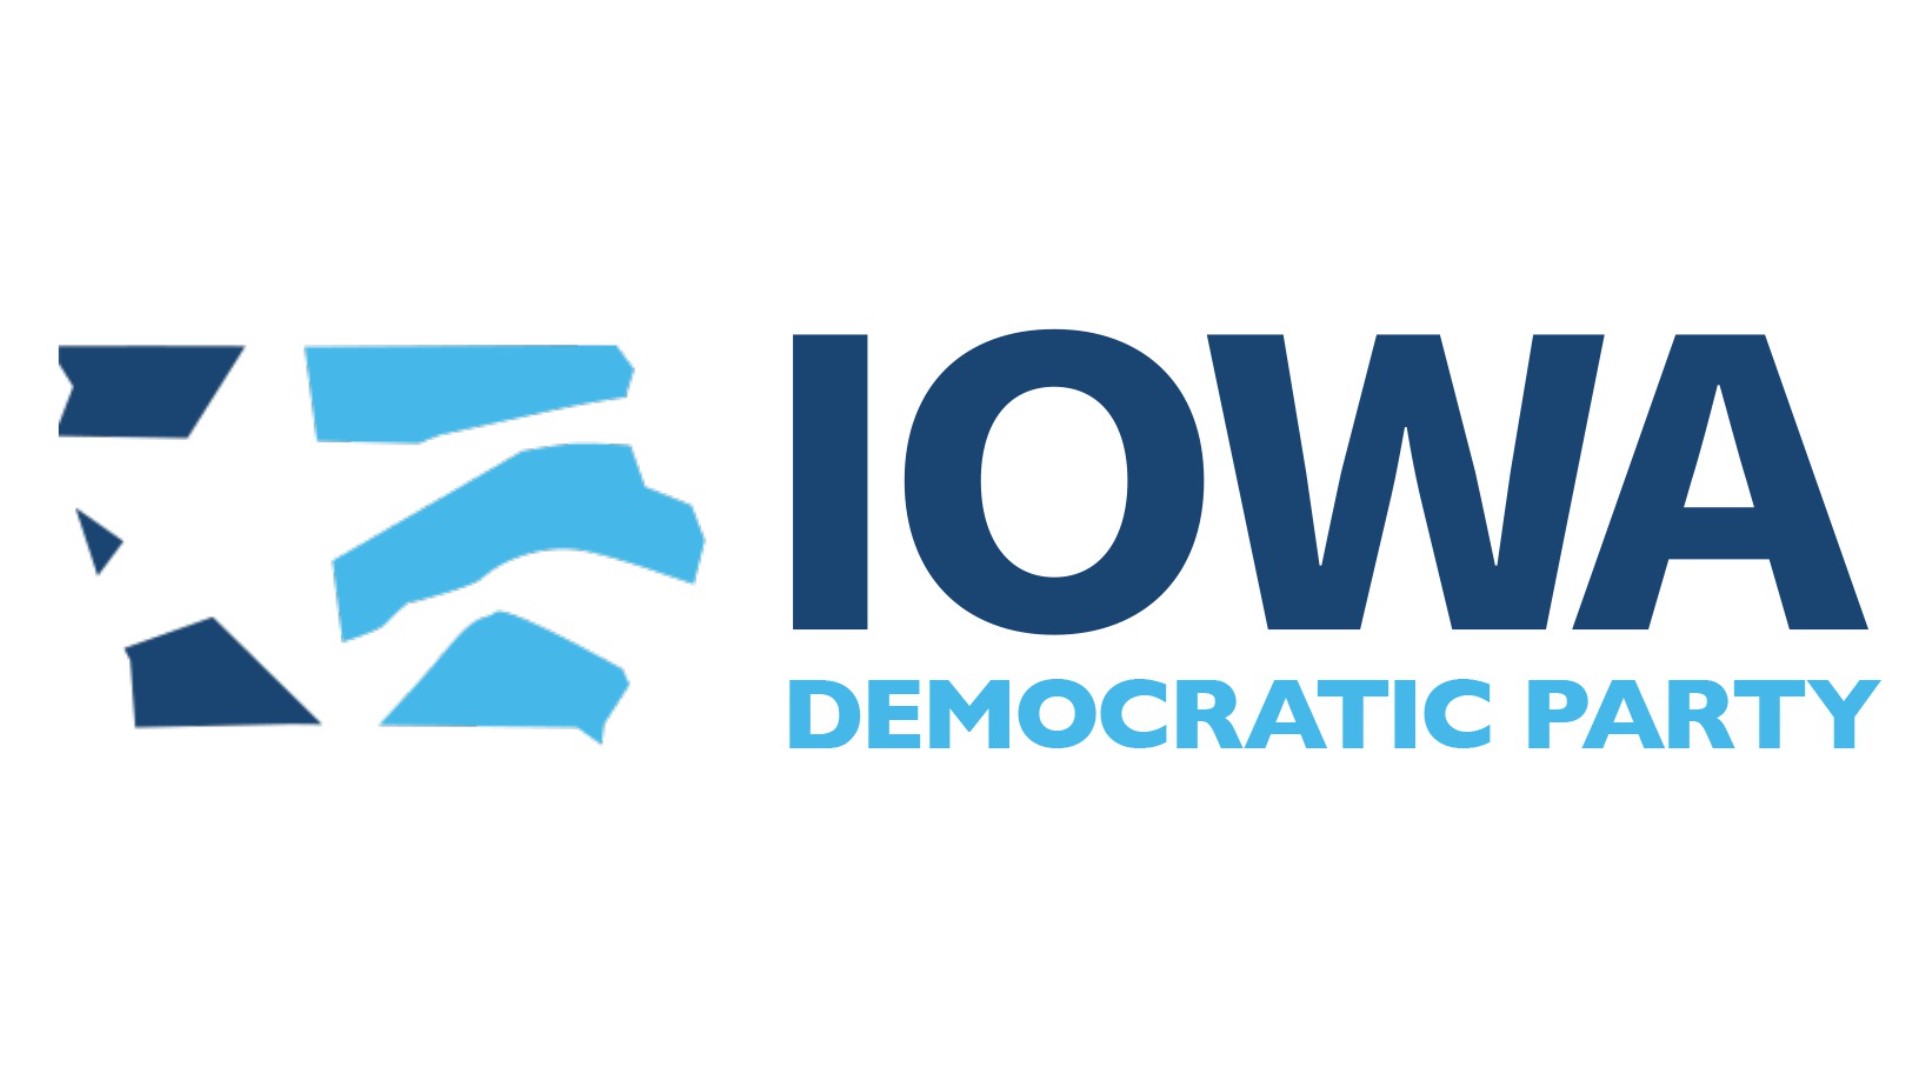 The fallout from 2020 has disappointed Iowa party leaders and activists, with some feeling jilted by the national party.